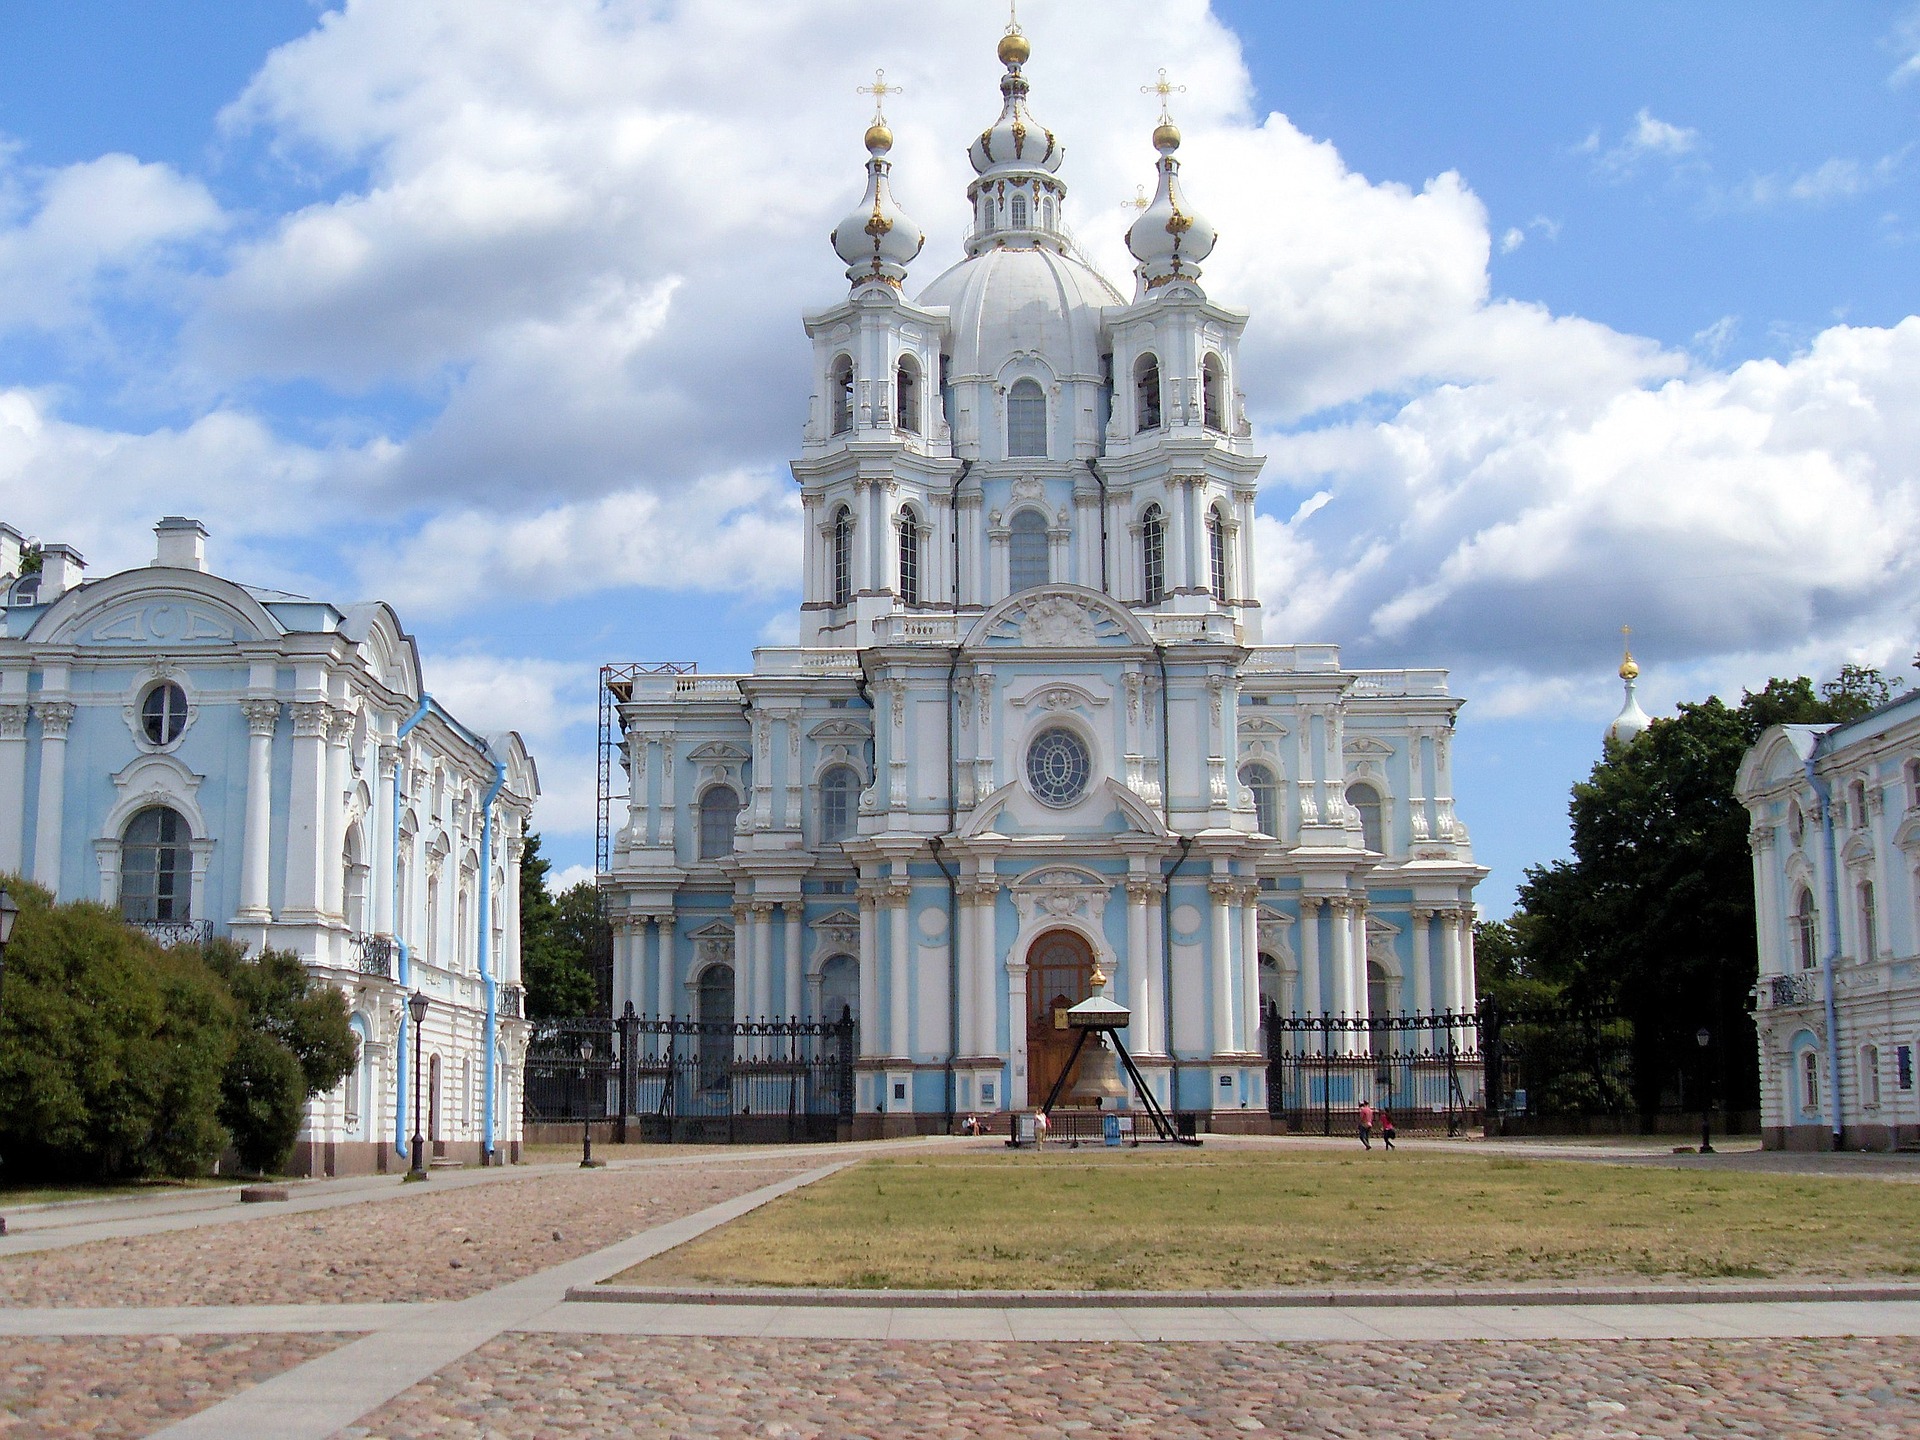 Church Hopping: The Best Churches to Visit in St. Petersburg